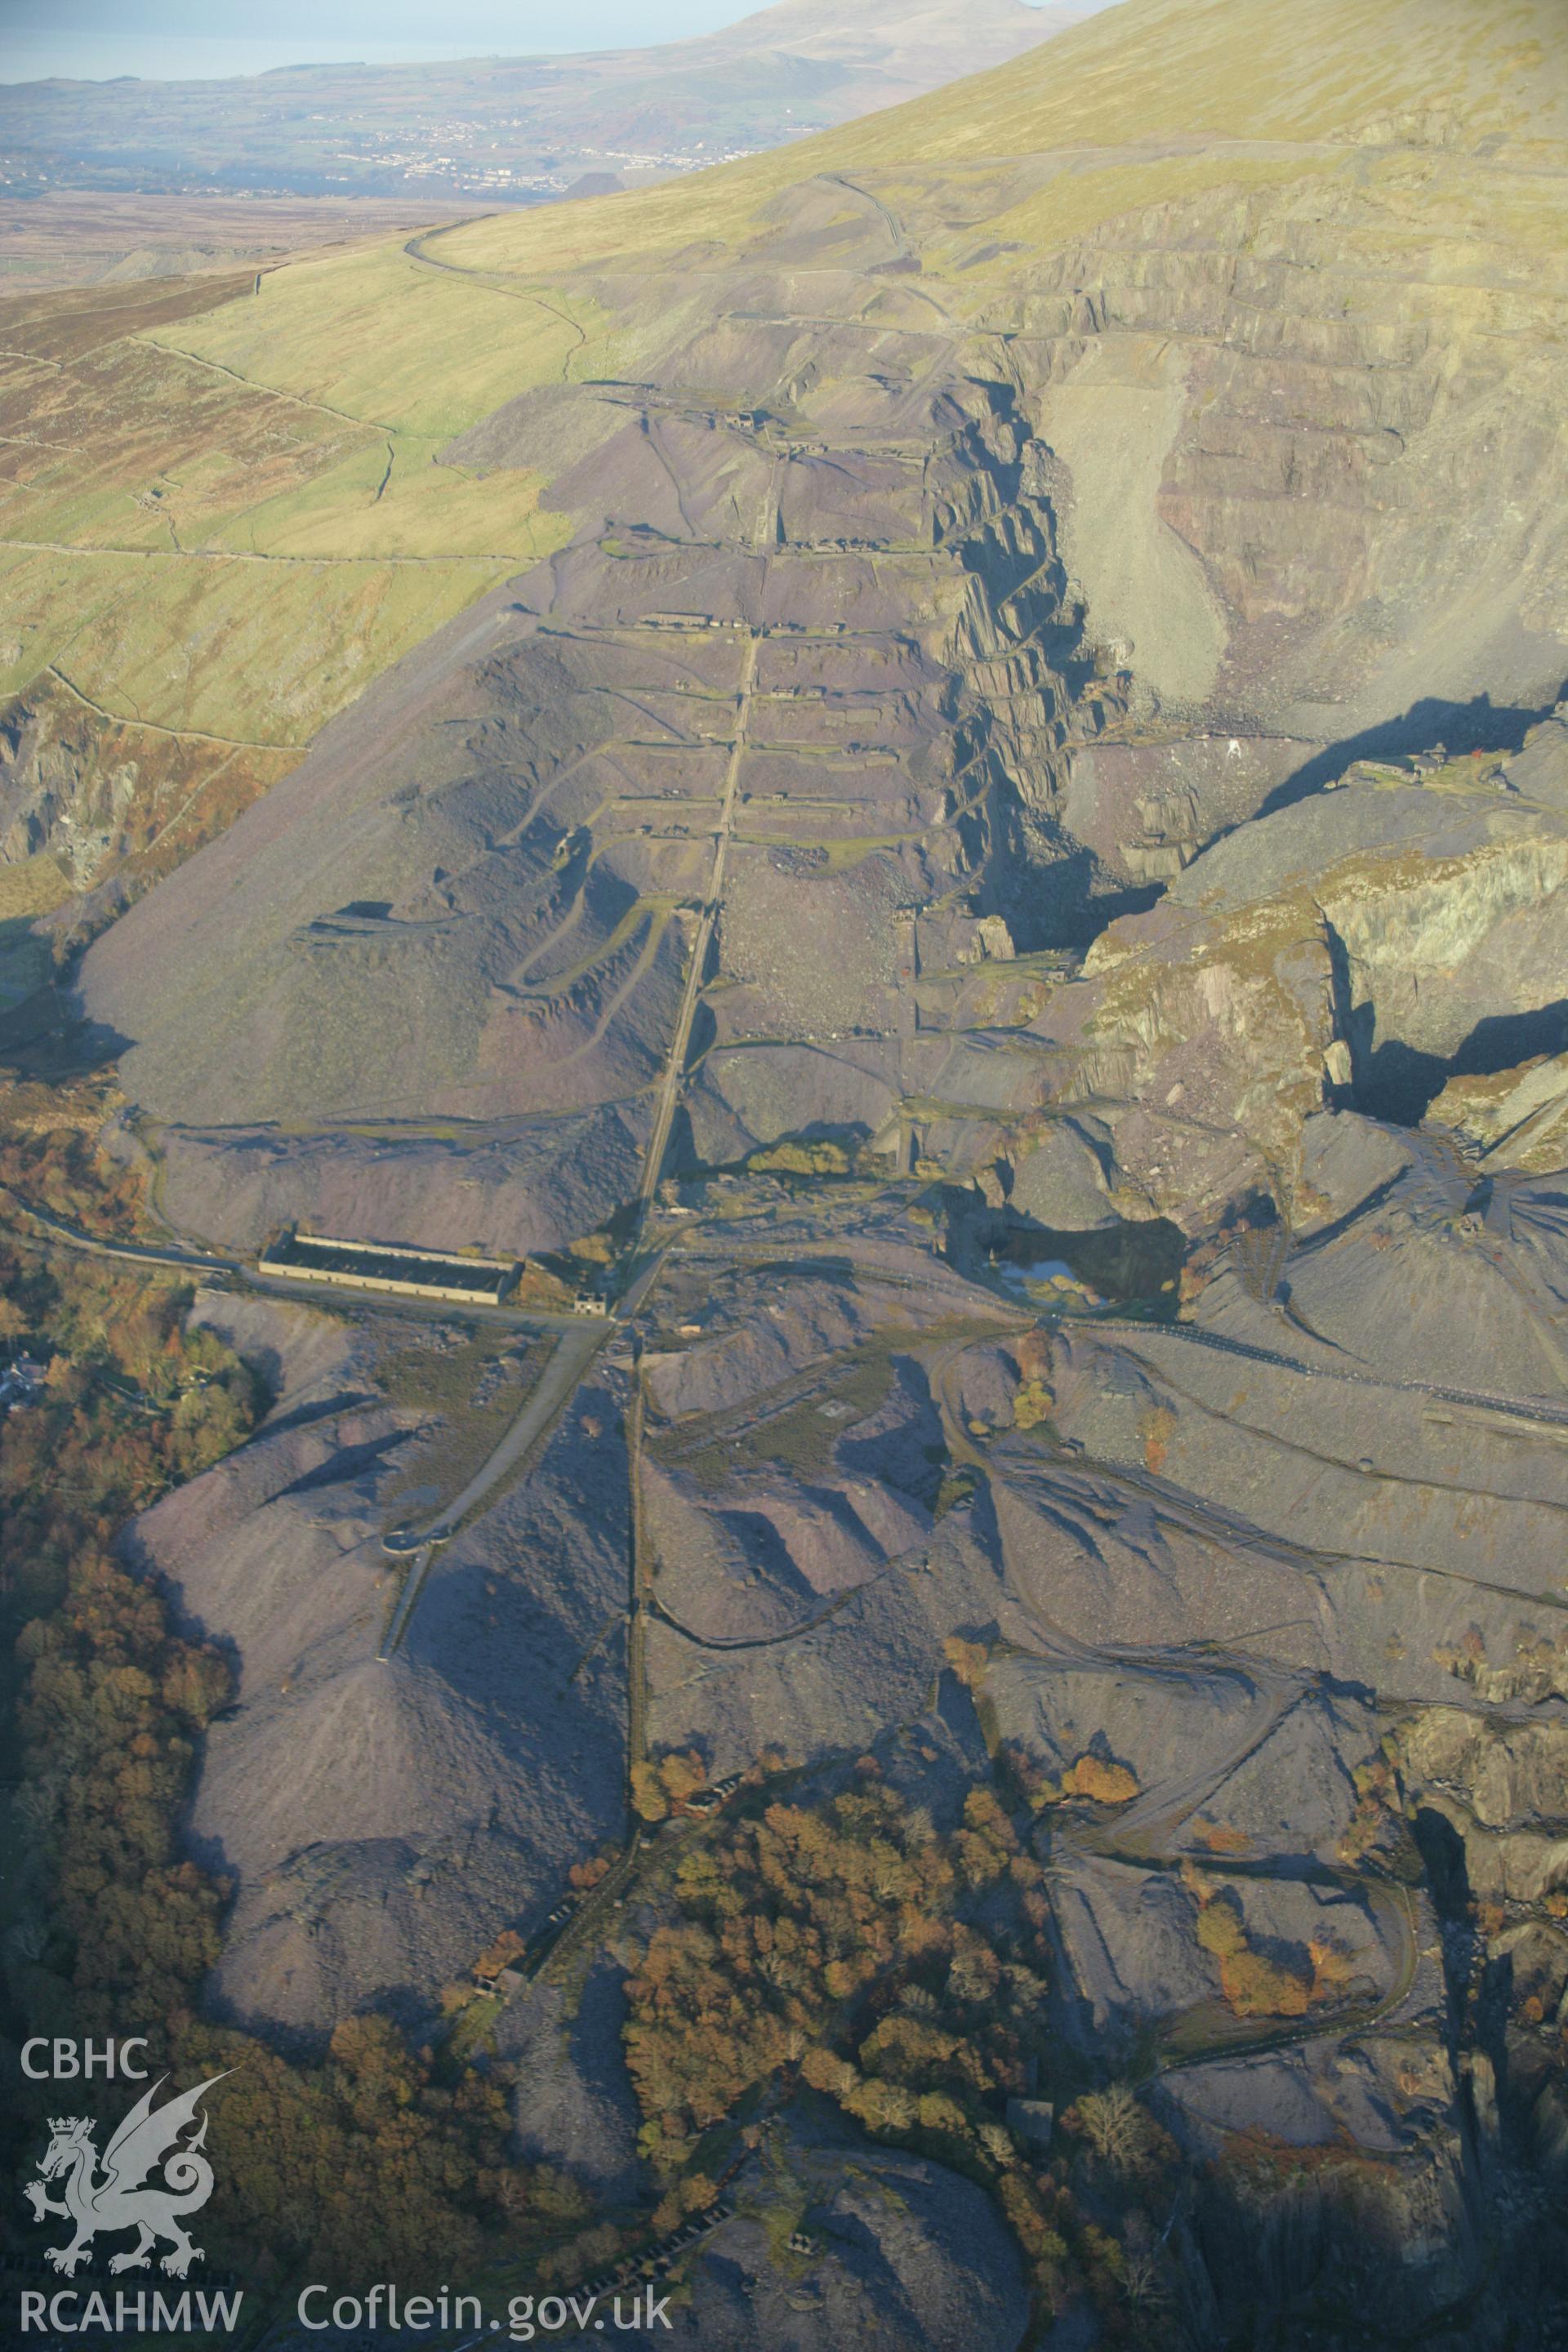 RCAHMW colour oblique aerial photograph of Dinorwic Slate Quarry. A winter landscape view from the south-west showing the main incline. Taken on 21 November 2005 by Toby Driver